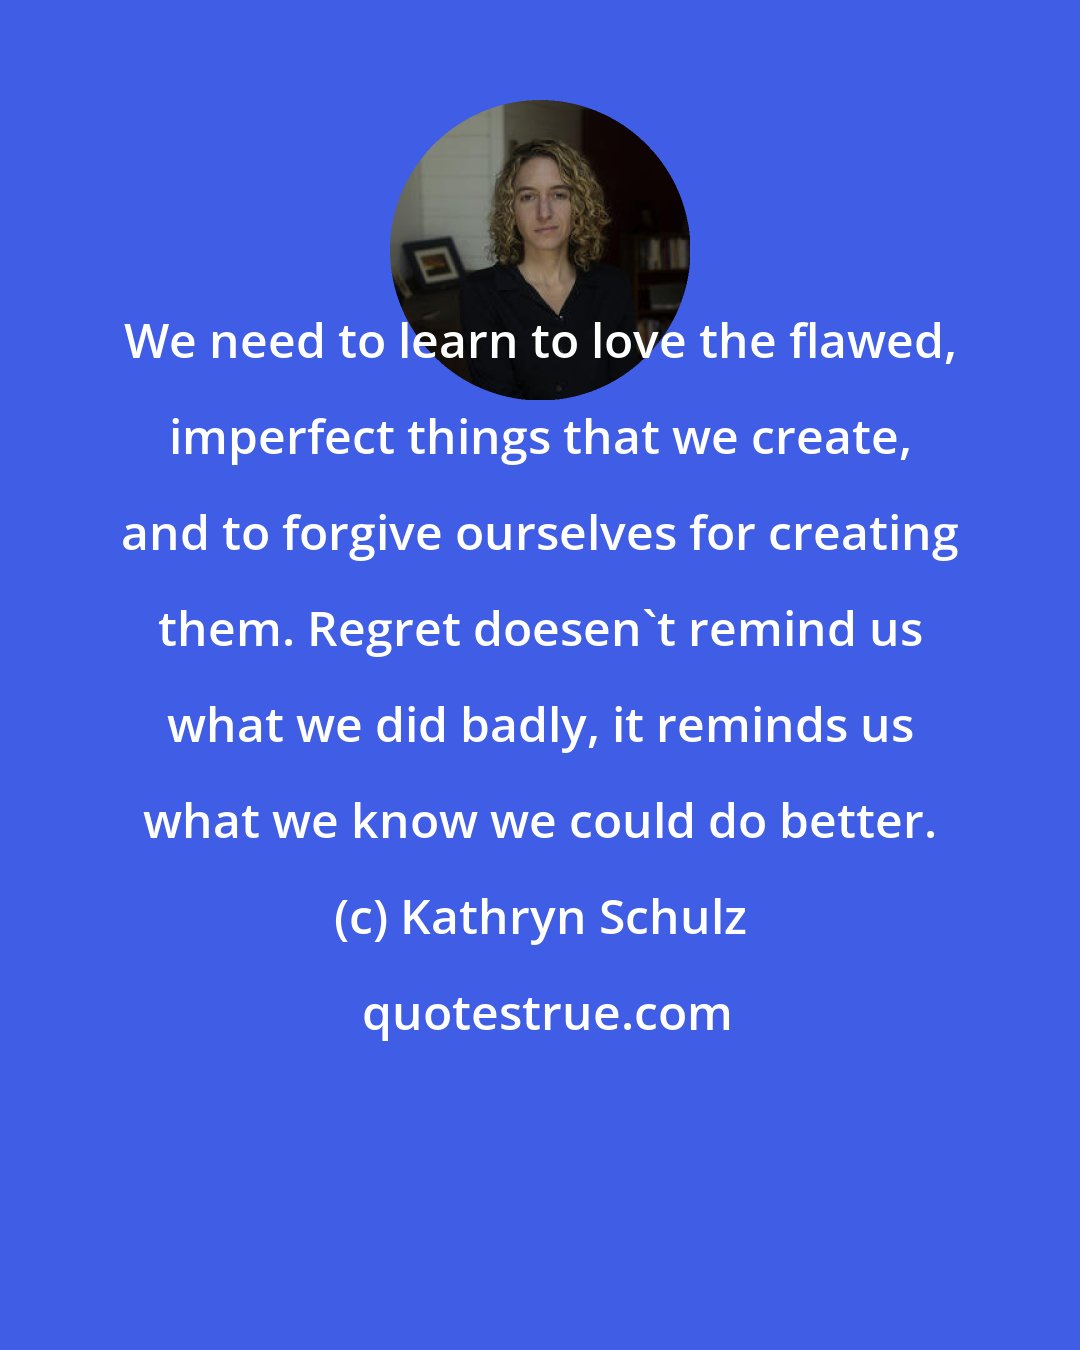 Kathryn Schulz: We need to learn to love the flawed, imperfect things that we create, and to forgive ourselves for creating them. Regret doesen't remind us what we did badly, it reminds us what we know we could do better.